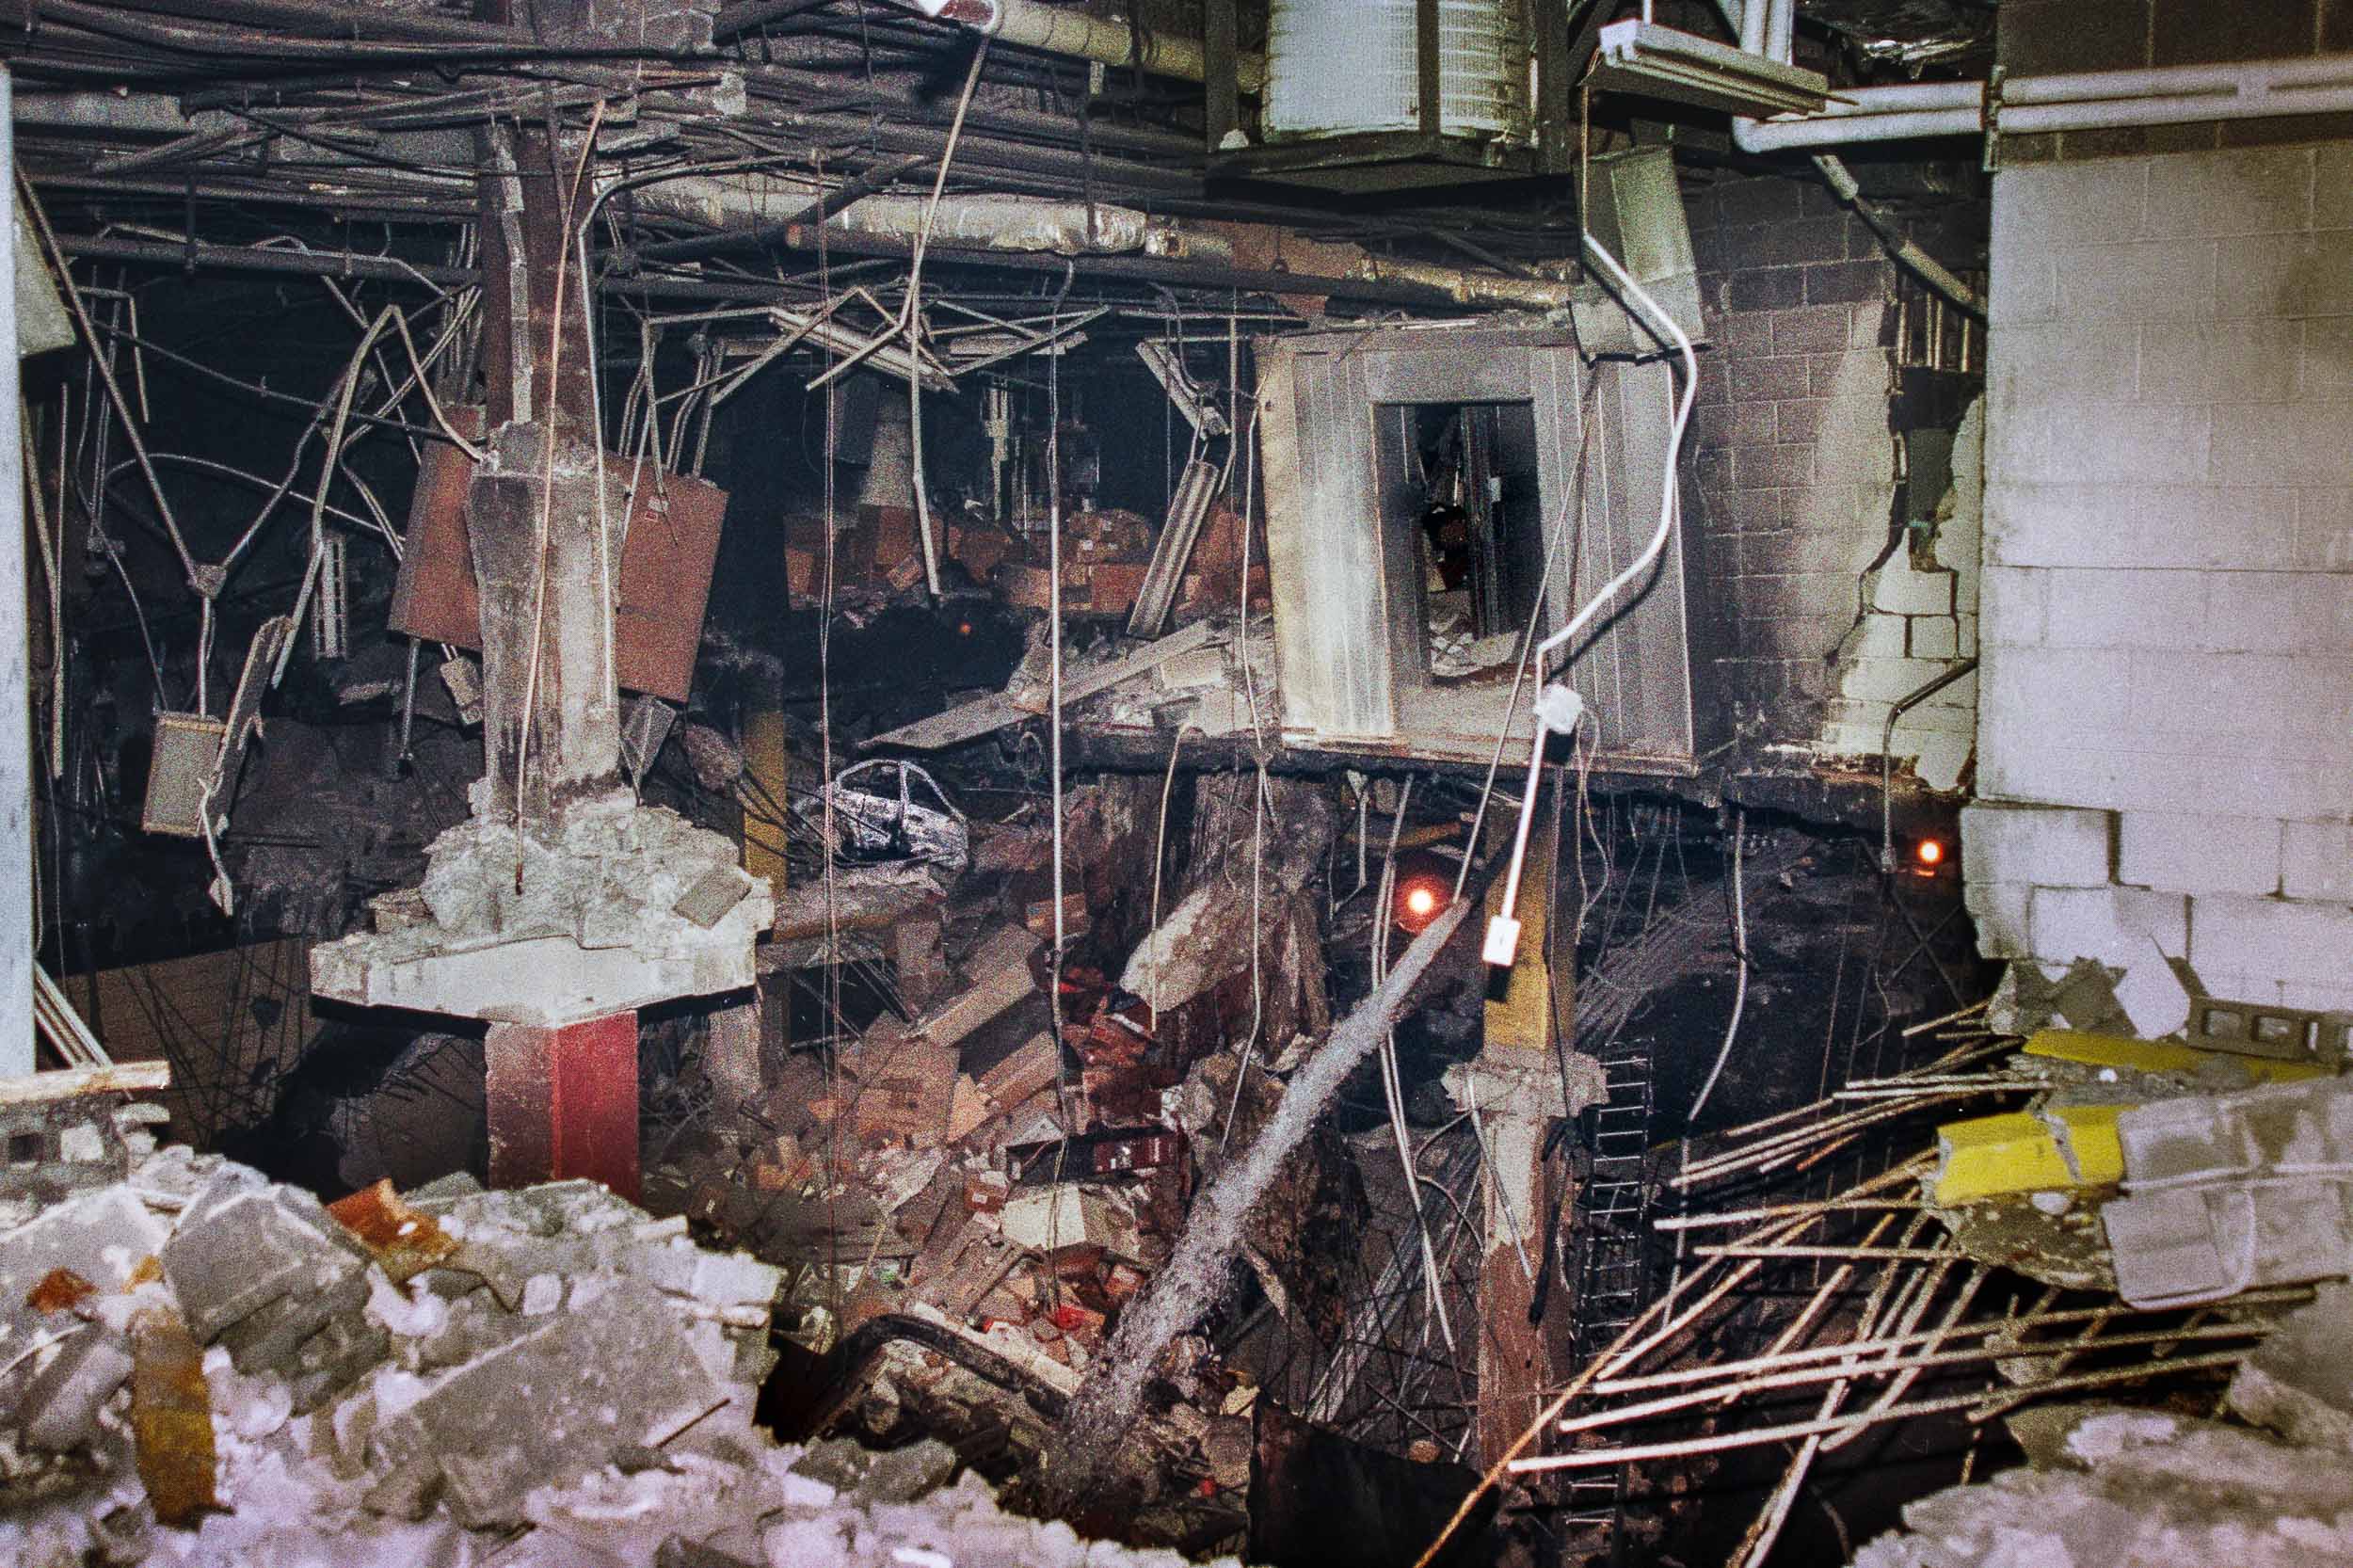 Bomb damage in the parking garage of the World Trade Center, NY, 1993